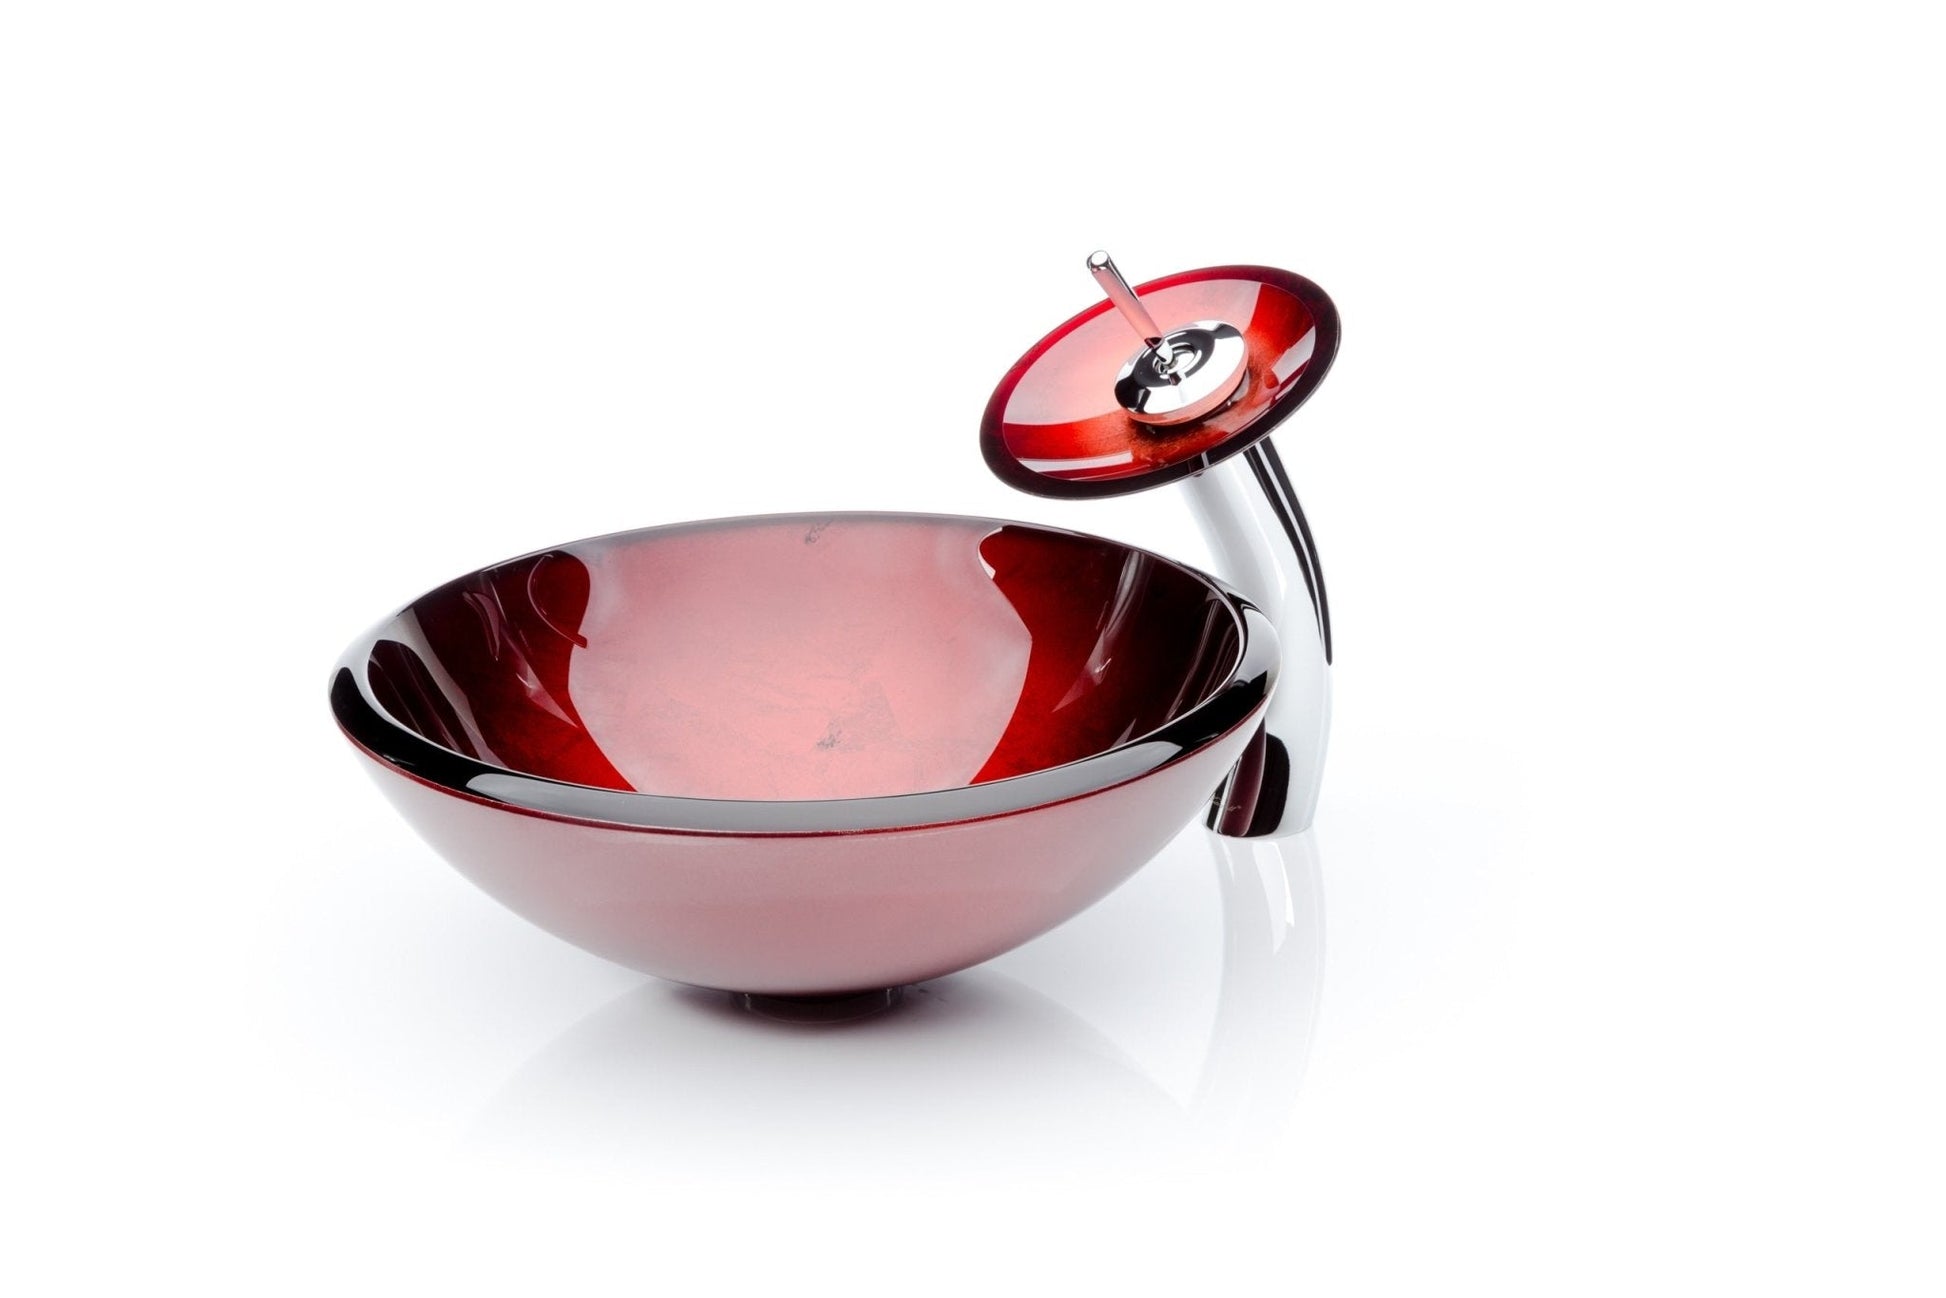 Red Leaf Round Glass Vessel Sink Combo Waterfall Faucet Set - |VESIMI Design| Luxury and Rustic bathrooms online